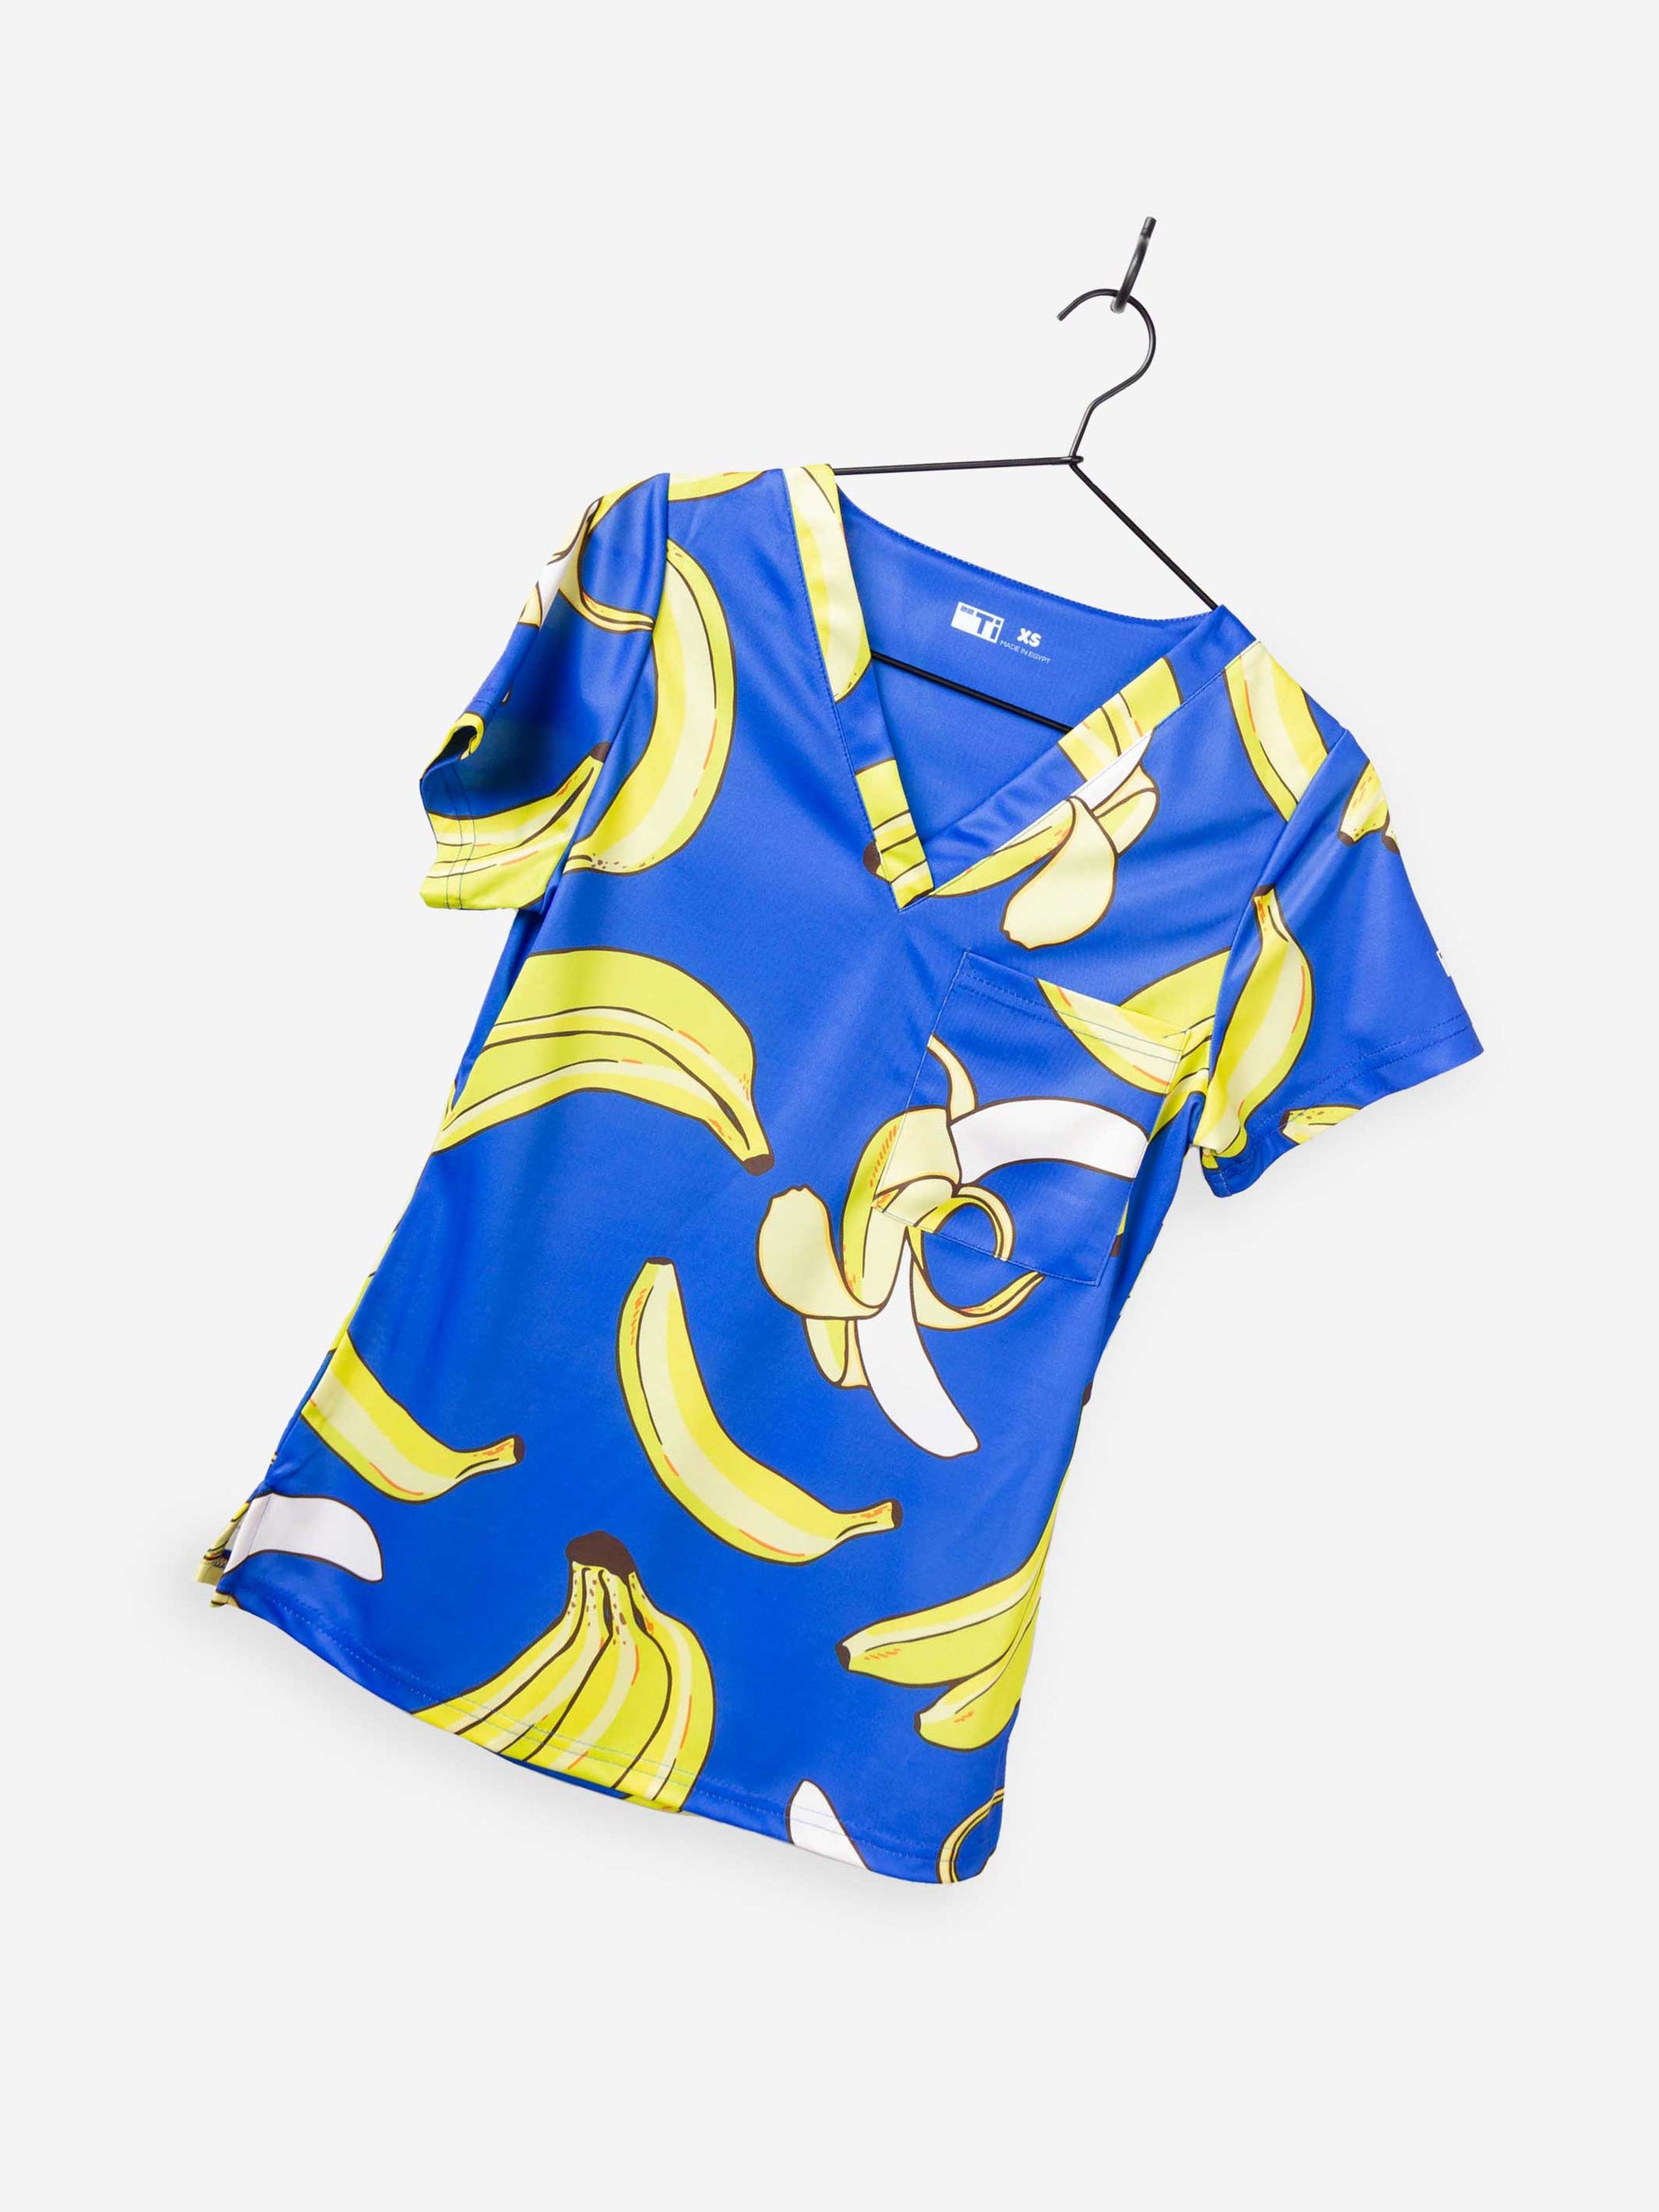 Women's Funny Banana Print Scrub Top Pattern in Royal Blue with V-neck